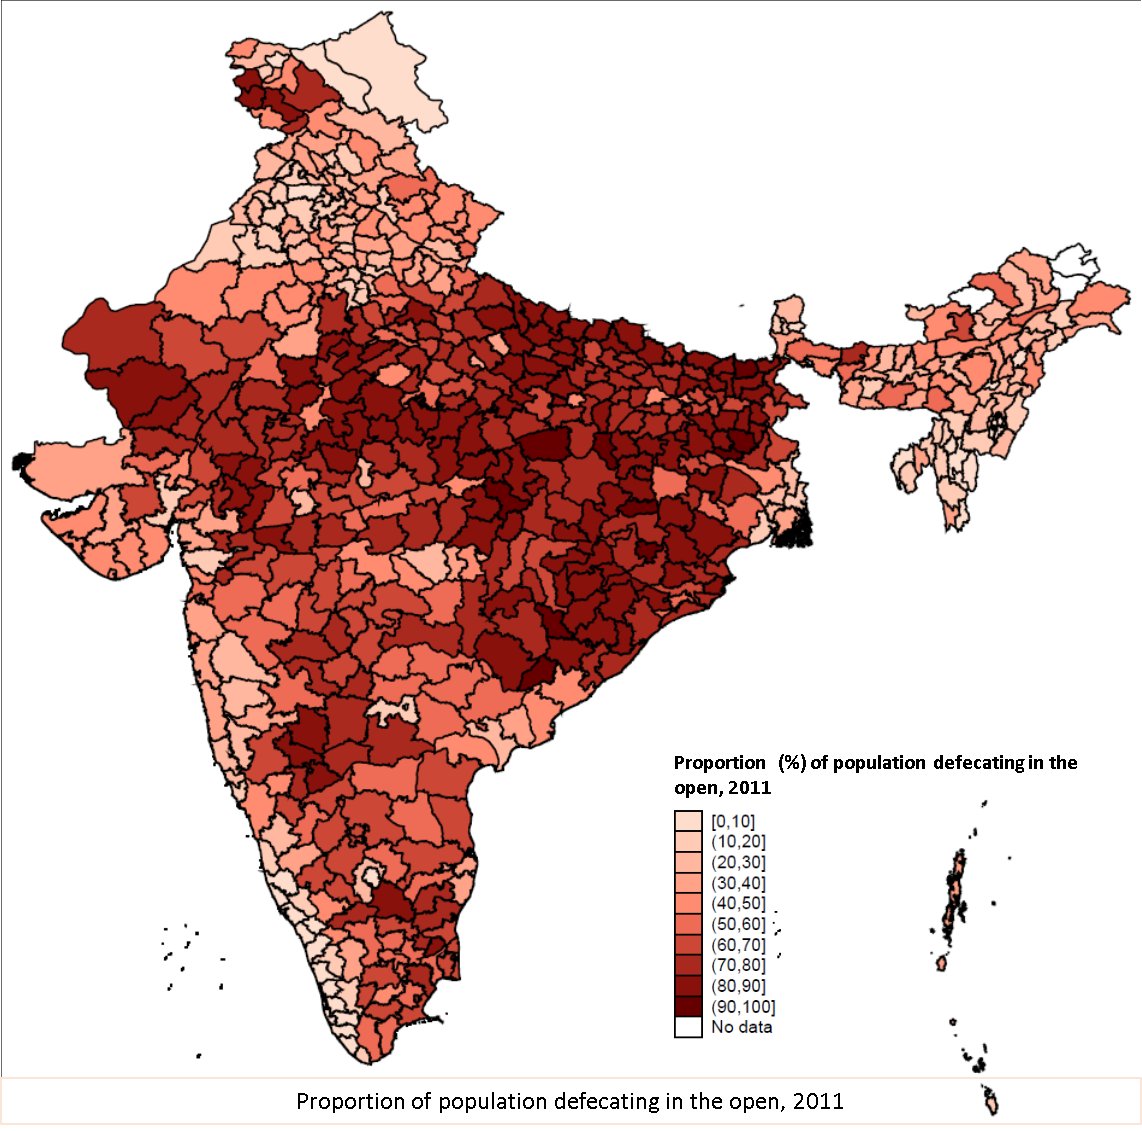 India was weirdly detailed maps on this... https://riceinstitute.org/blog/more-maps-did-open-defecation-really-decline-in-india-between-2001-and-2011/